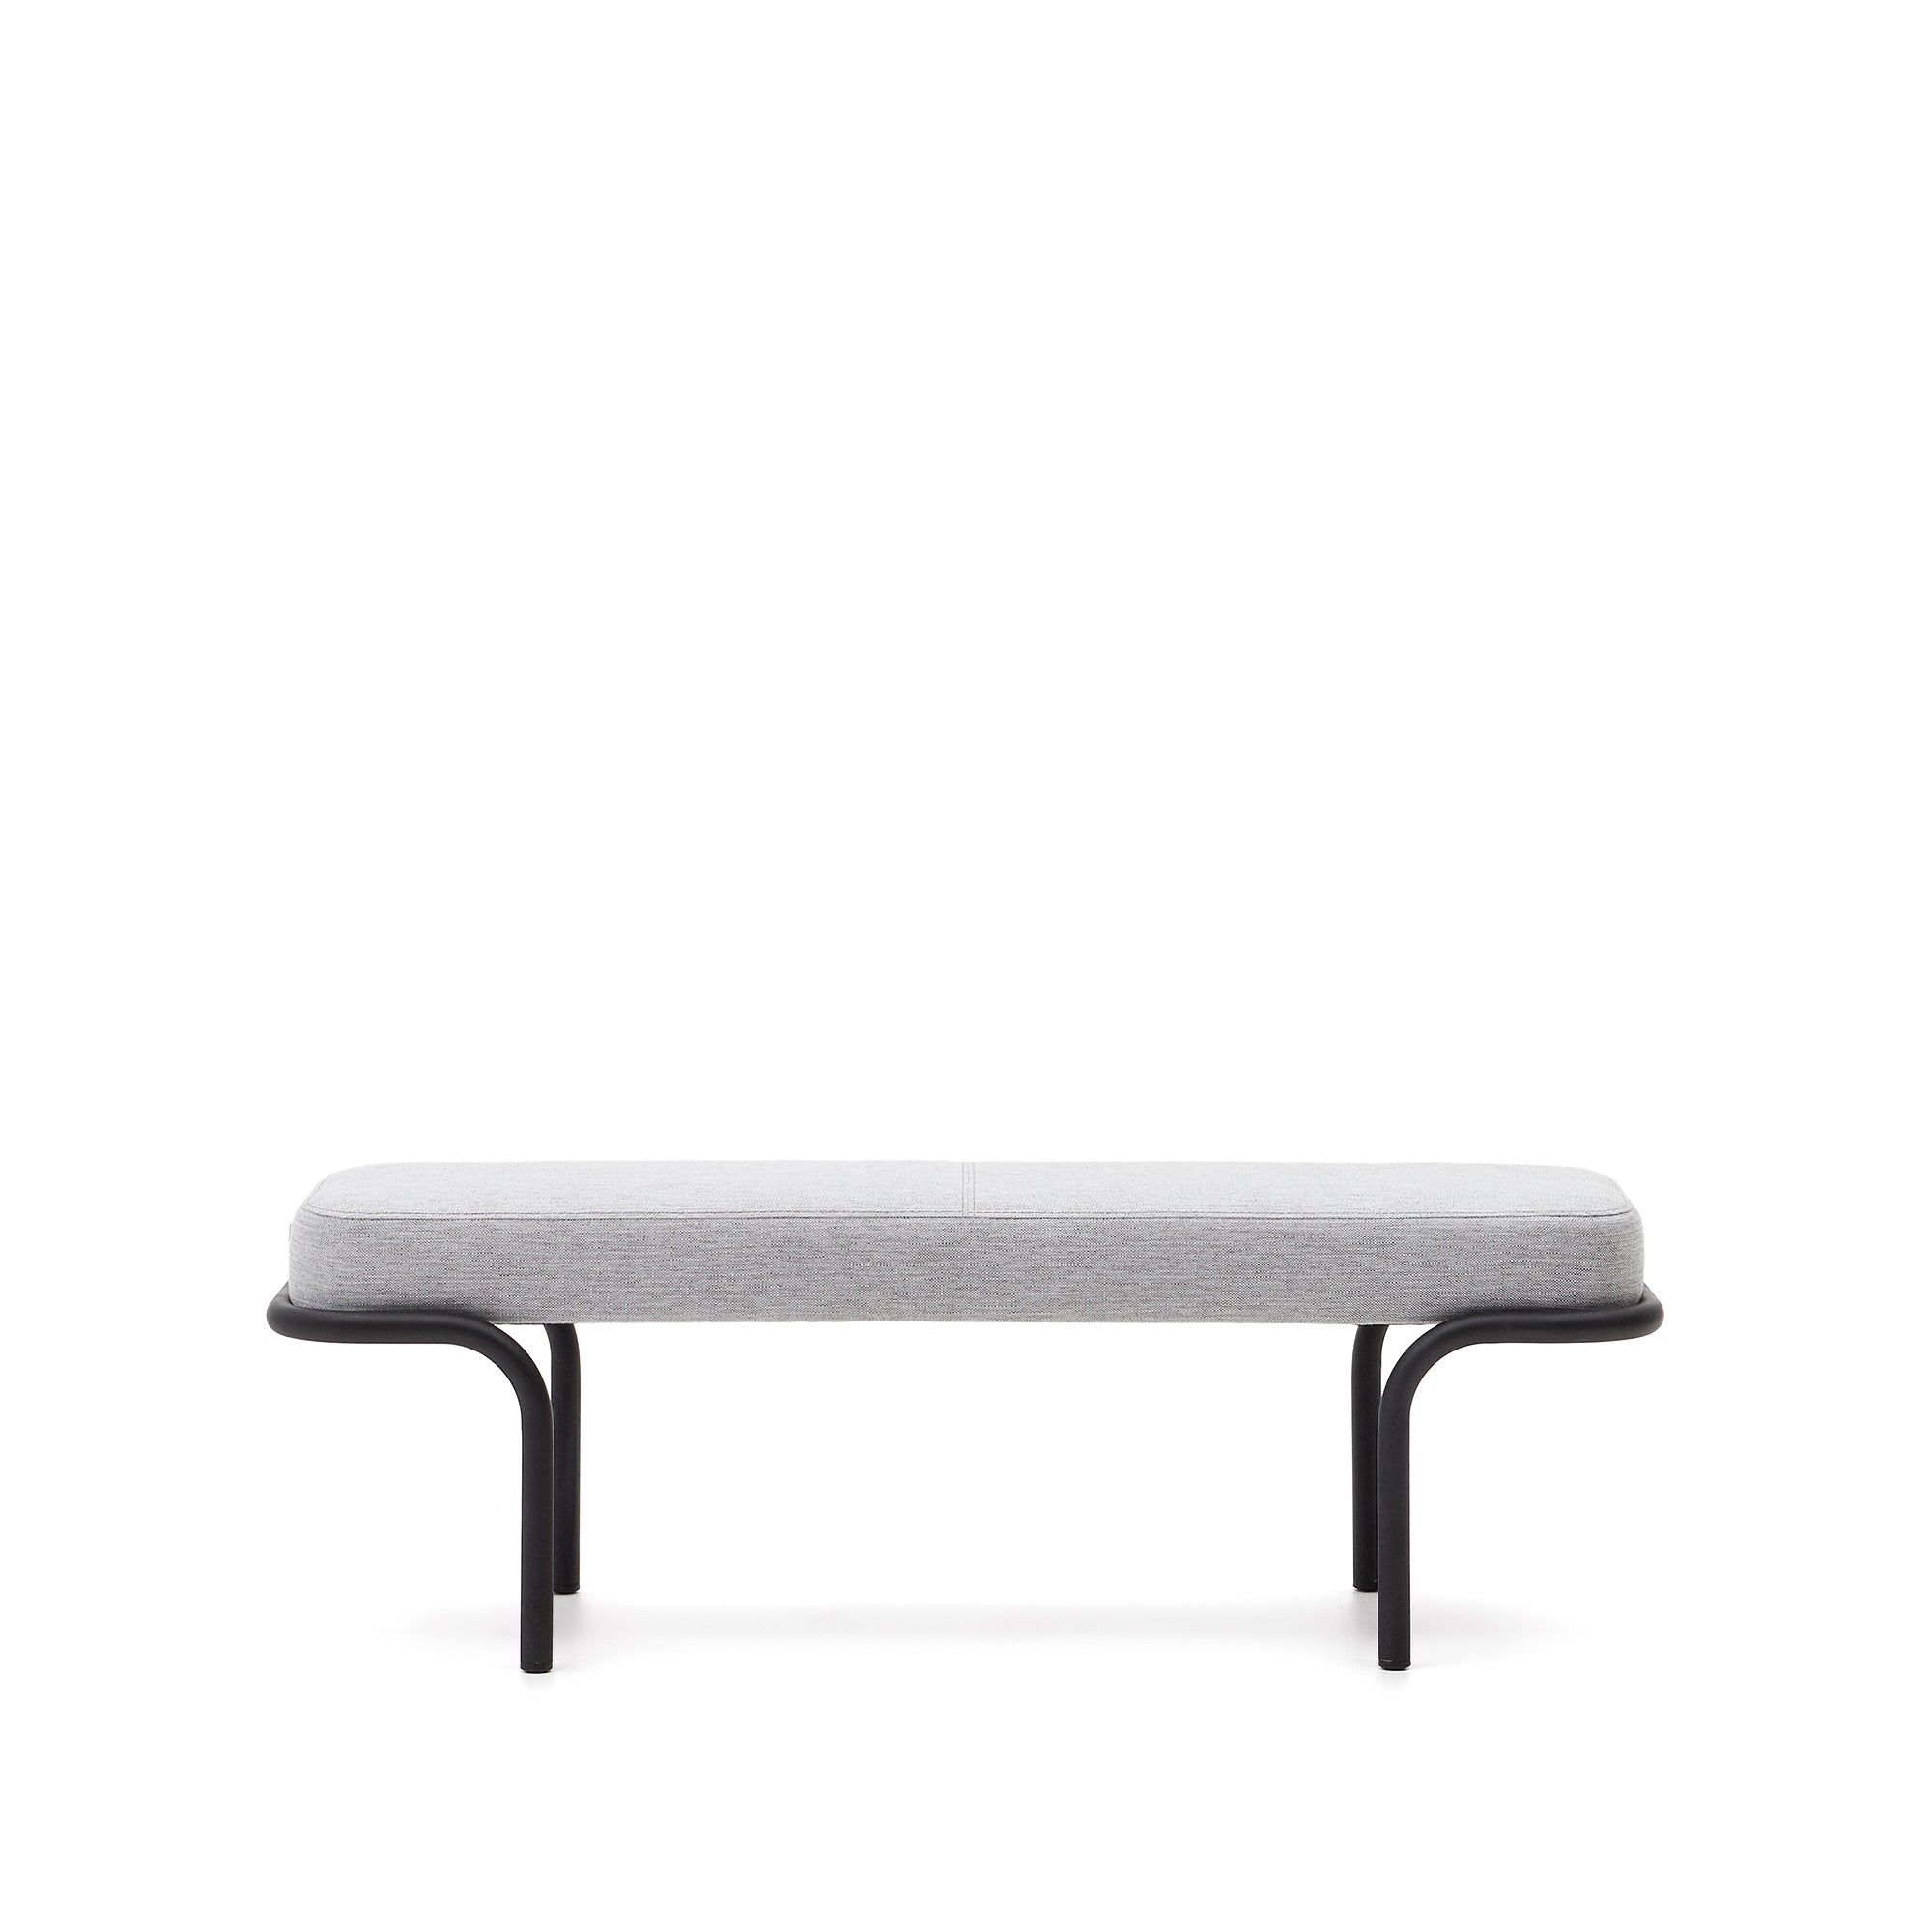 Compo bench in grey and black metal structure, 130 cm